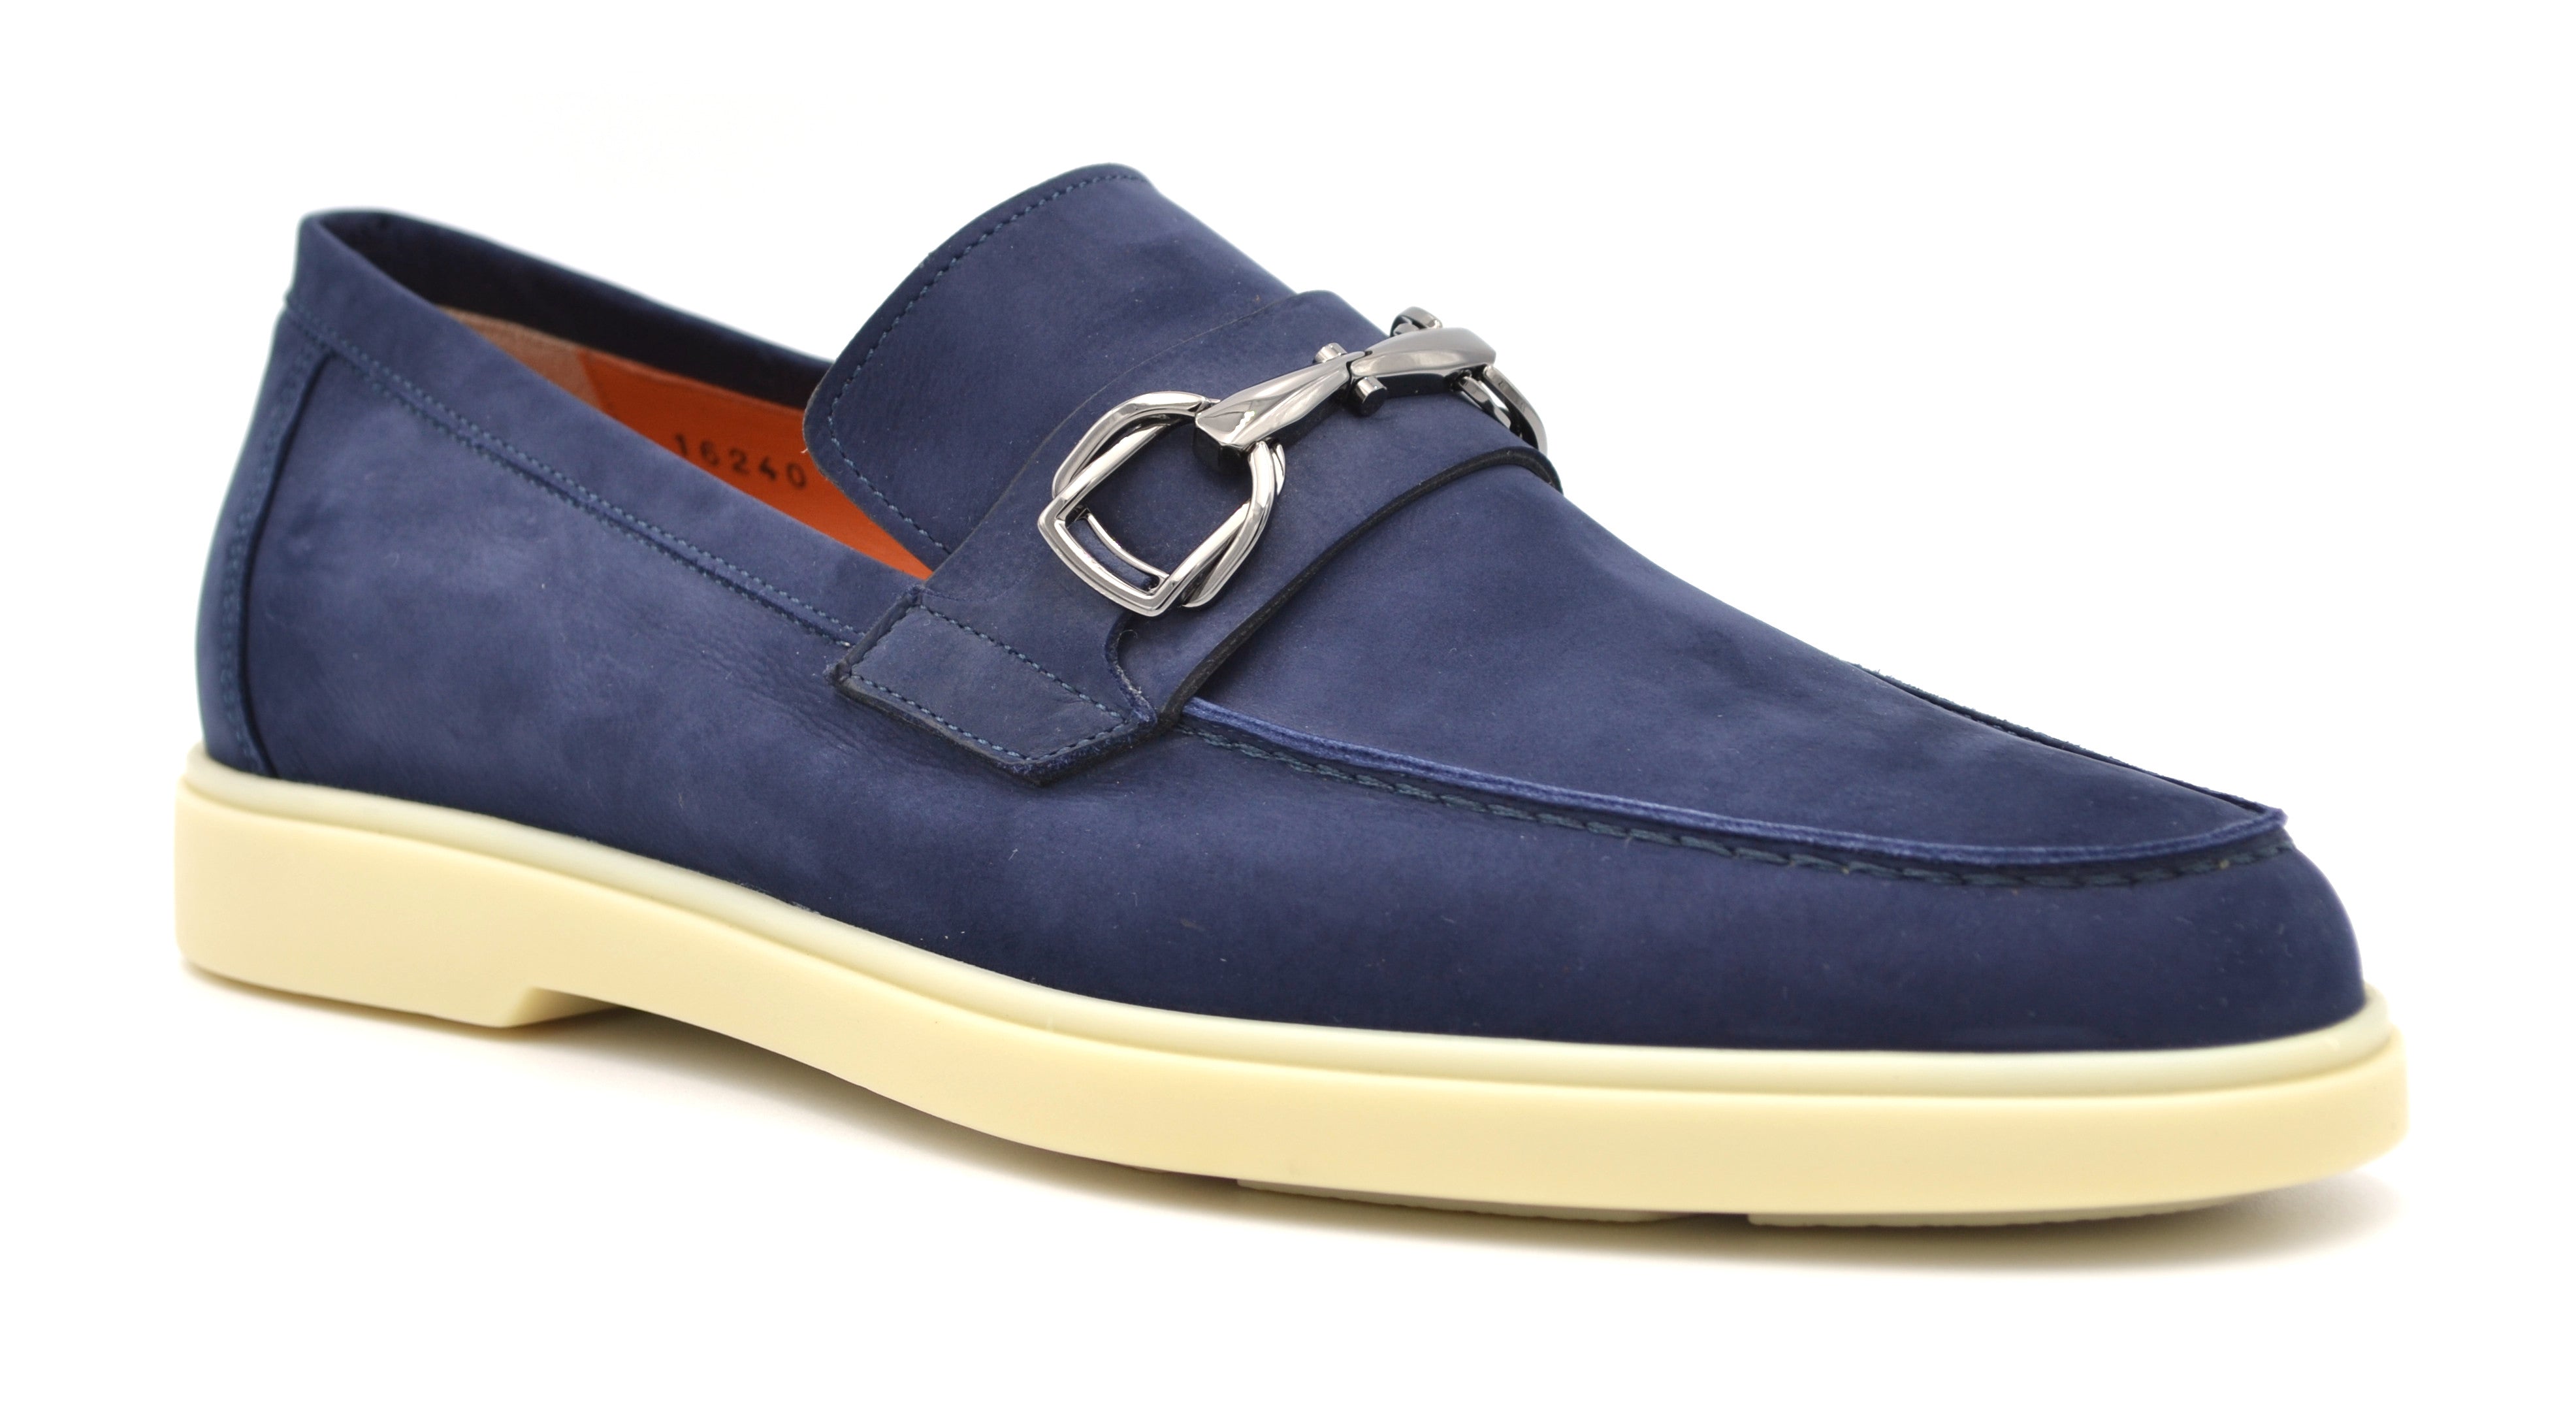 MGYA16240 TICESFOU50 loafer